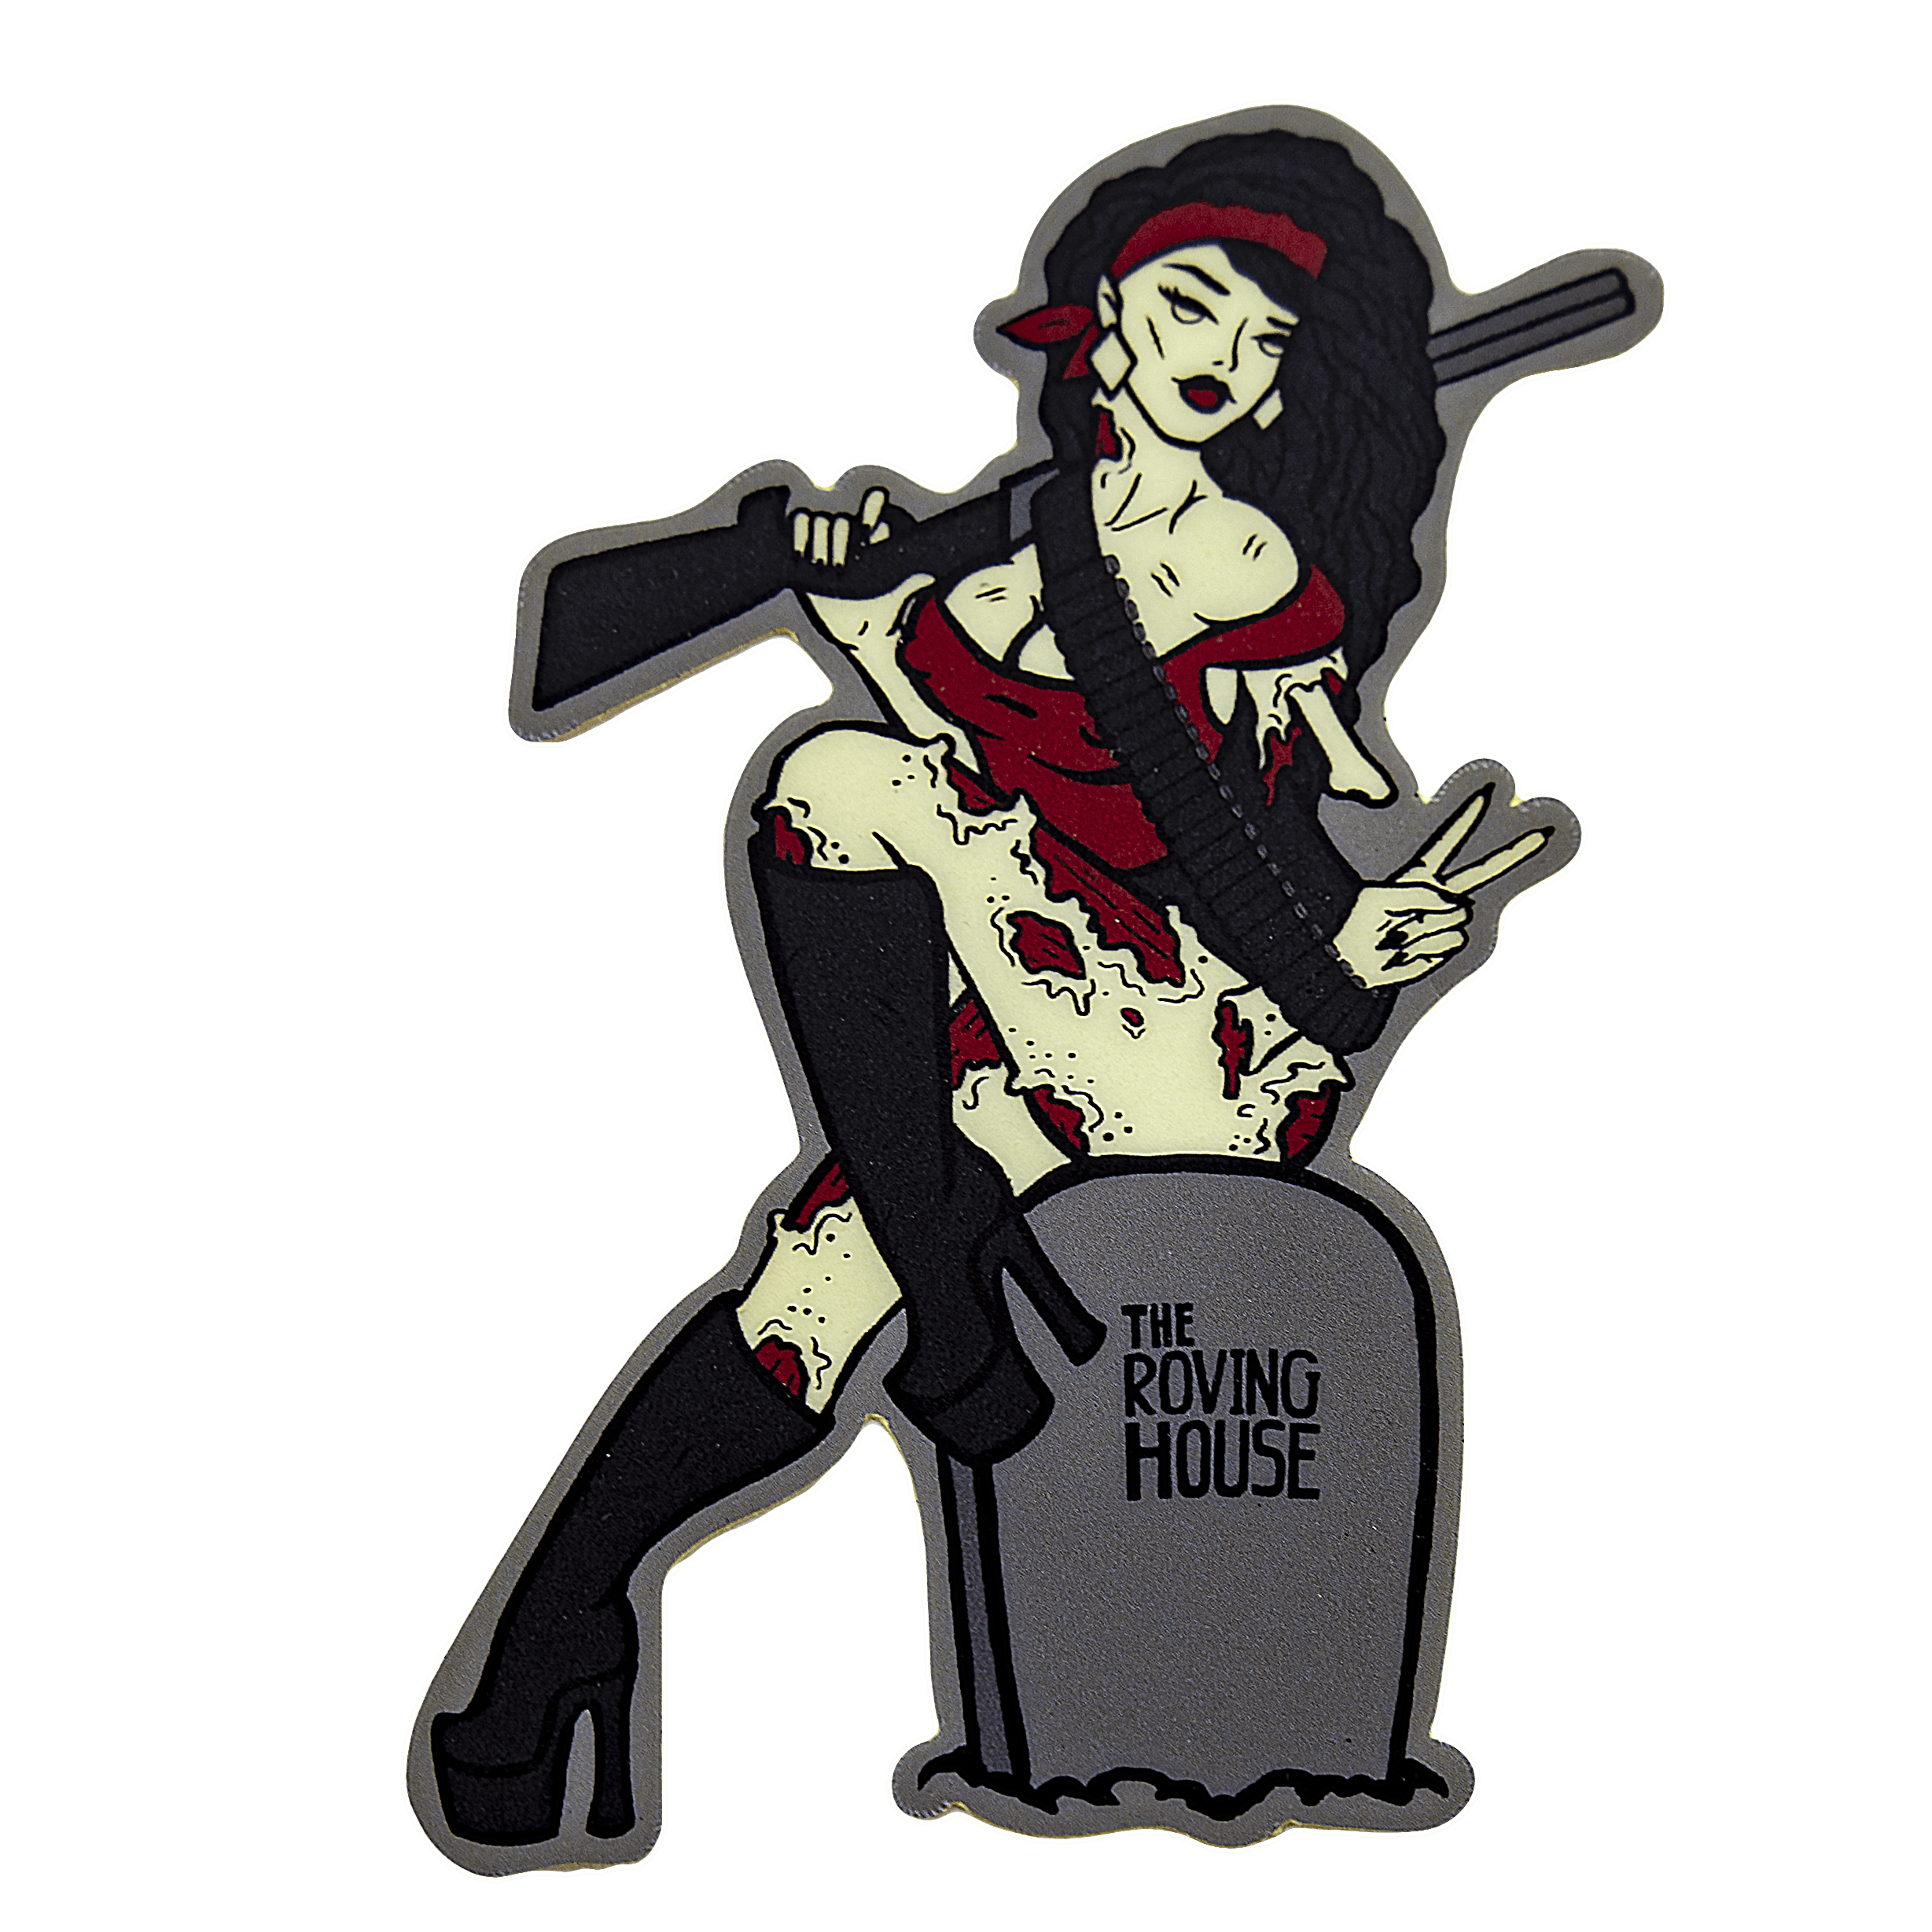 A vinyl sticker of an attractive, buxom zombie woman with greenish white skin, white eyes, black hair, and red flesh wounds. She sits on a grey gravestone that reads "THE ROVING HOUSE", holding a shotgun.